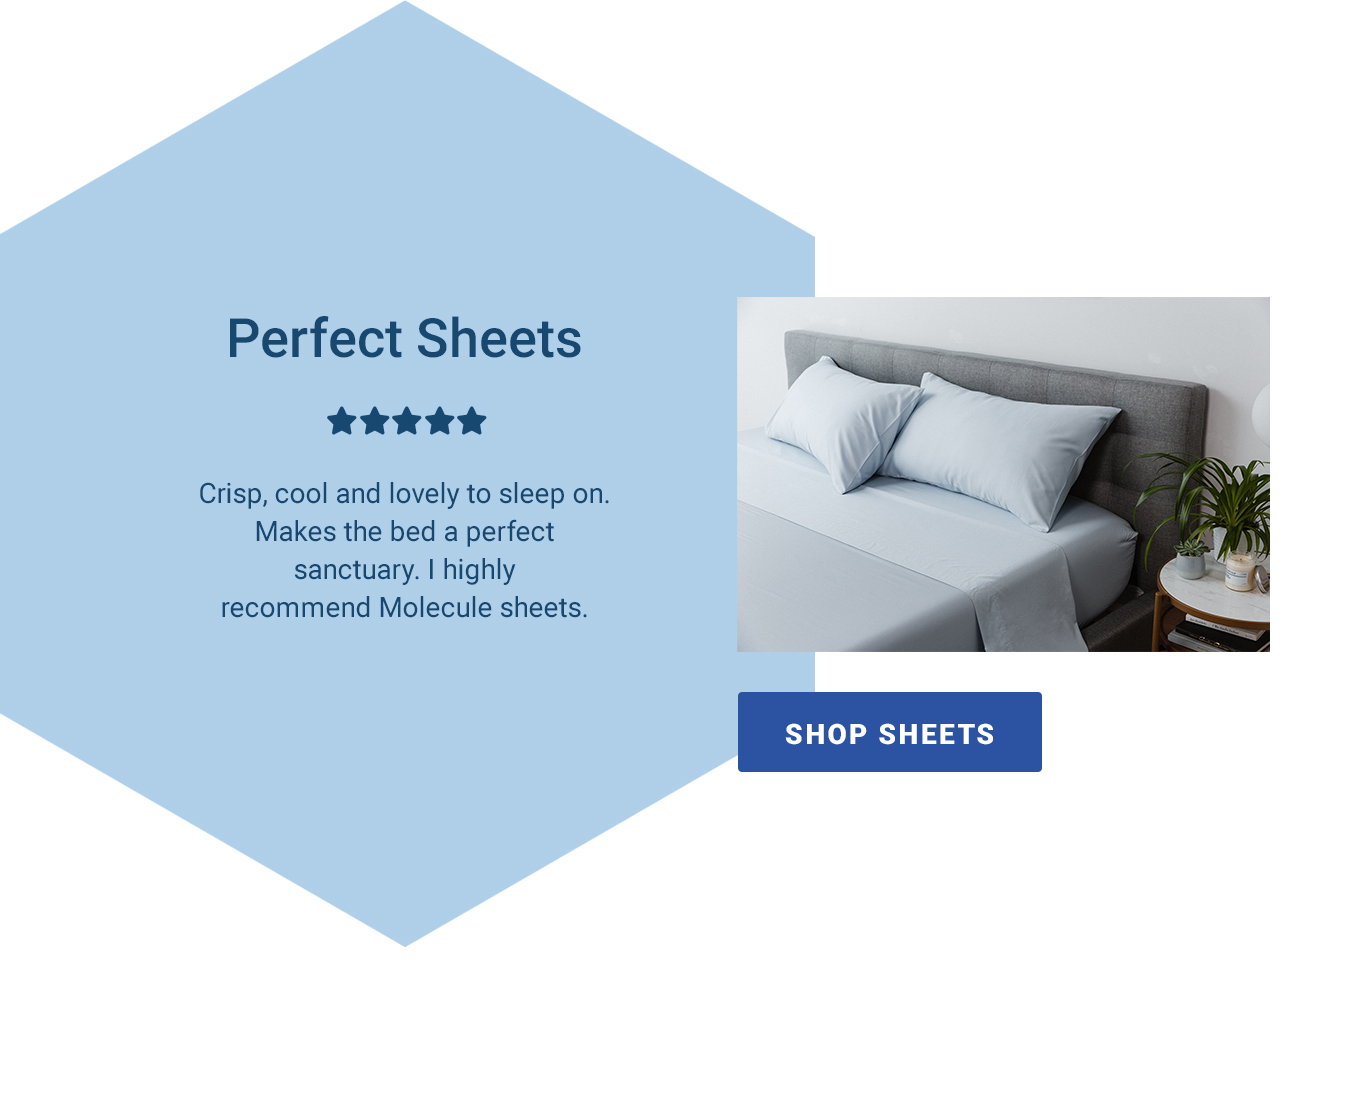 Crisp, cool and lovely to sleep on. Makes the bed a perfect sanctuary. I highly recommend Molecule sheets. [SHOP SHEETS]